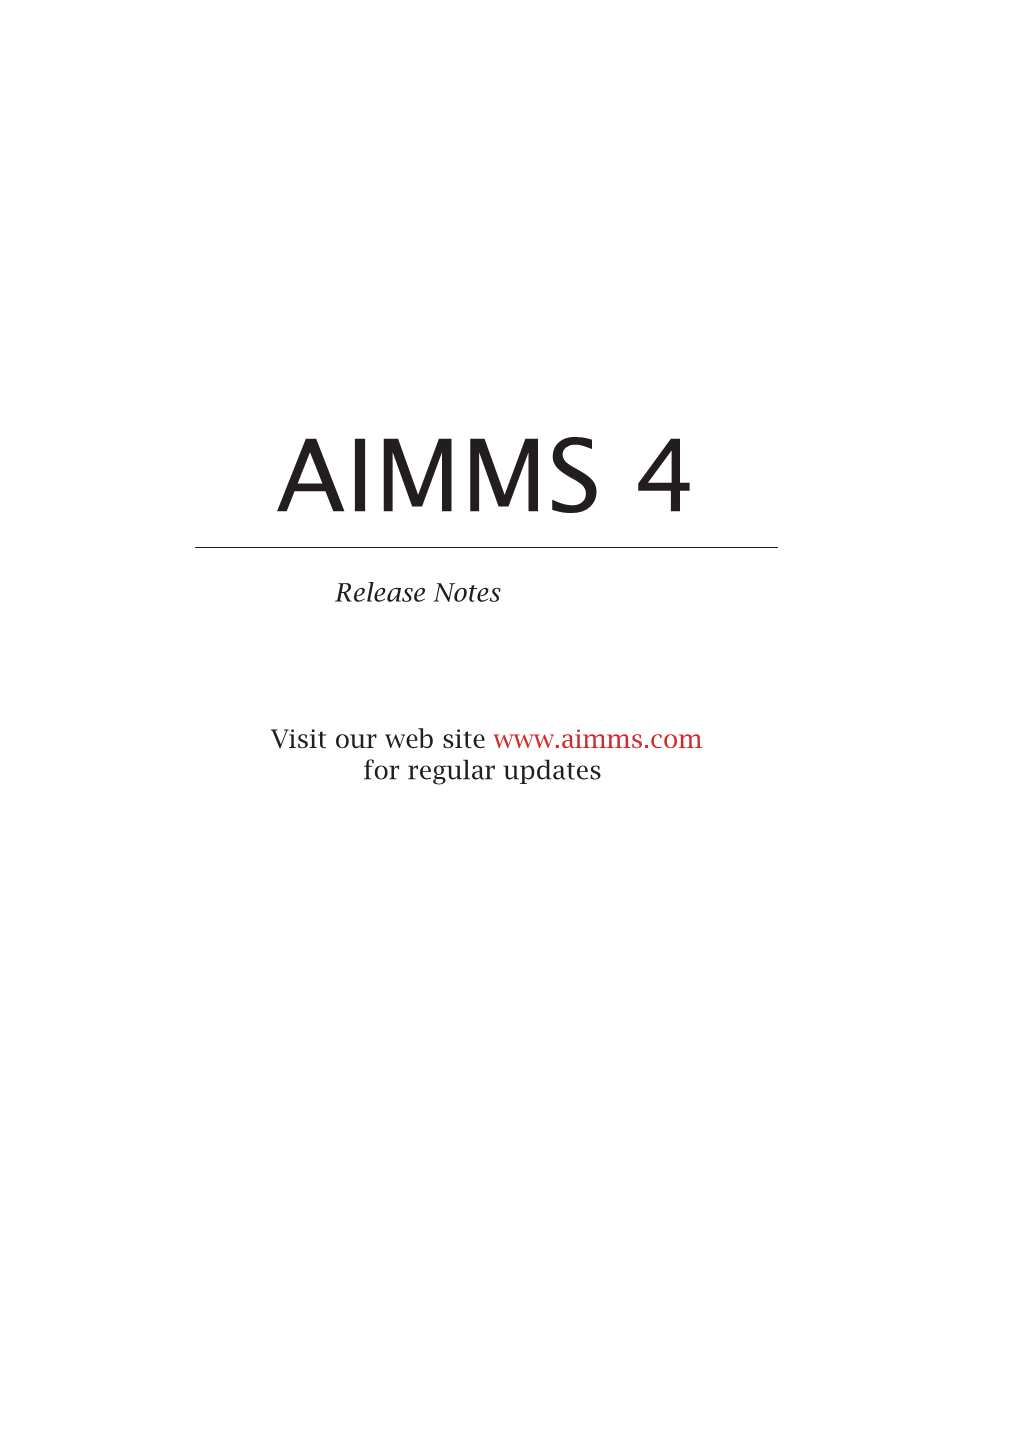 AIMMS 4 Release Notes